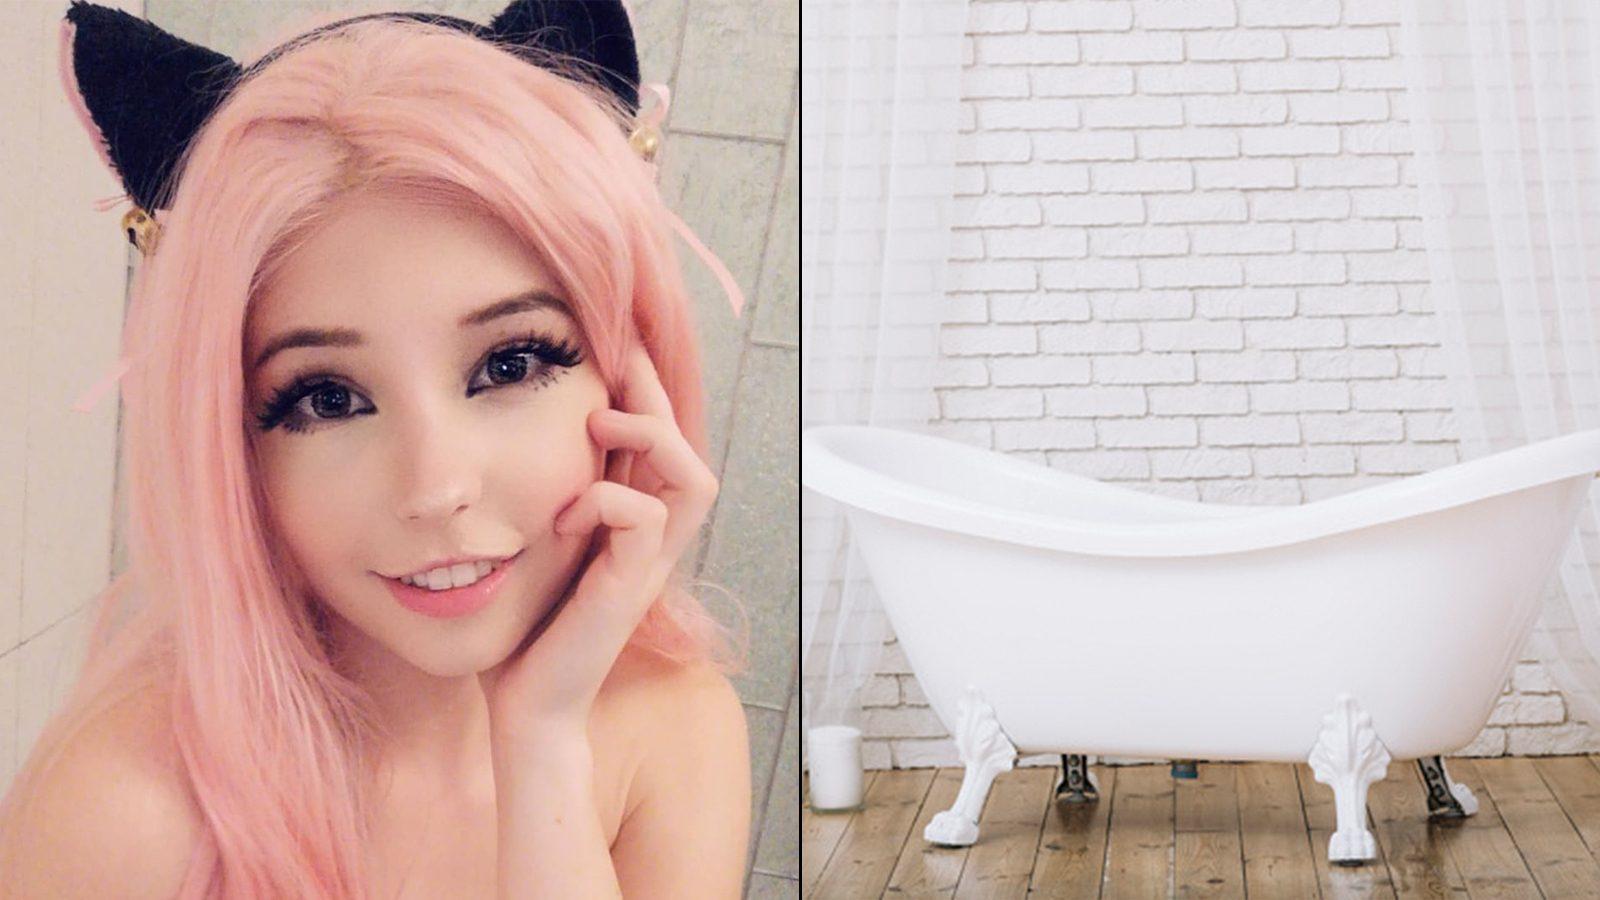 Instagram Star Sold Her Used Bath Water for $30 a Bottle